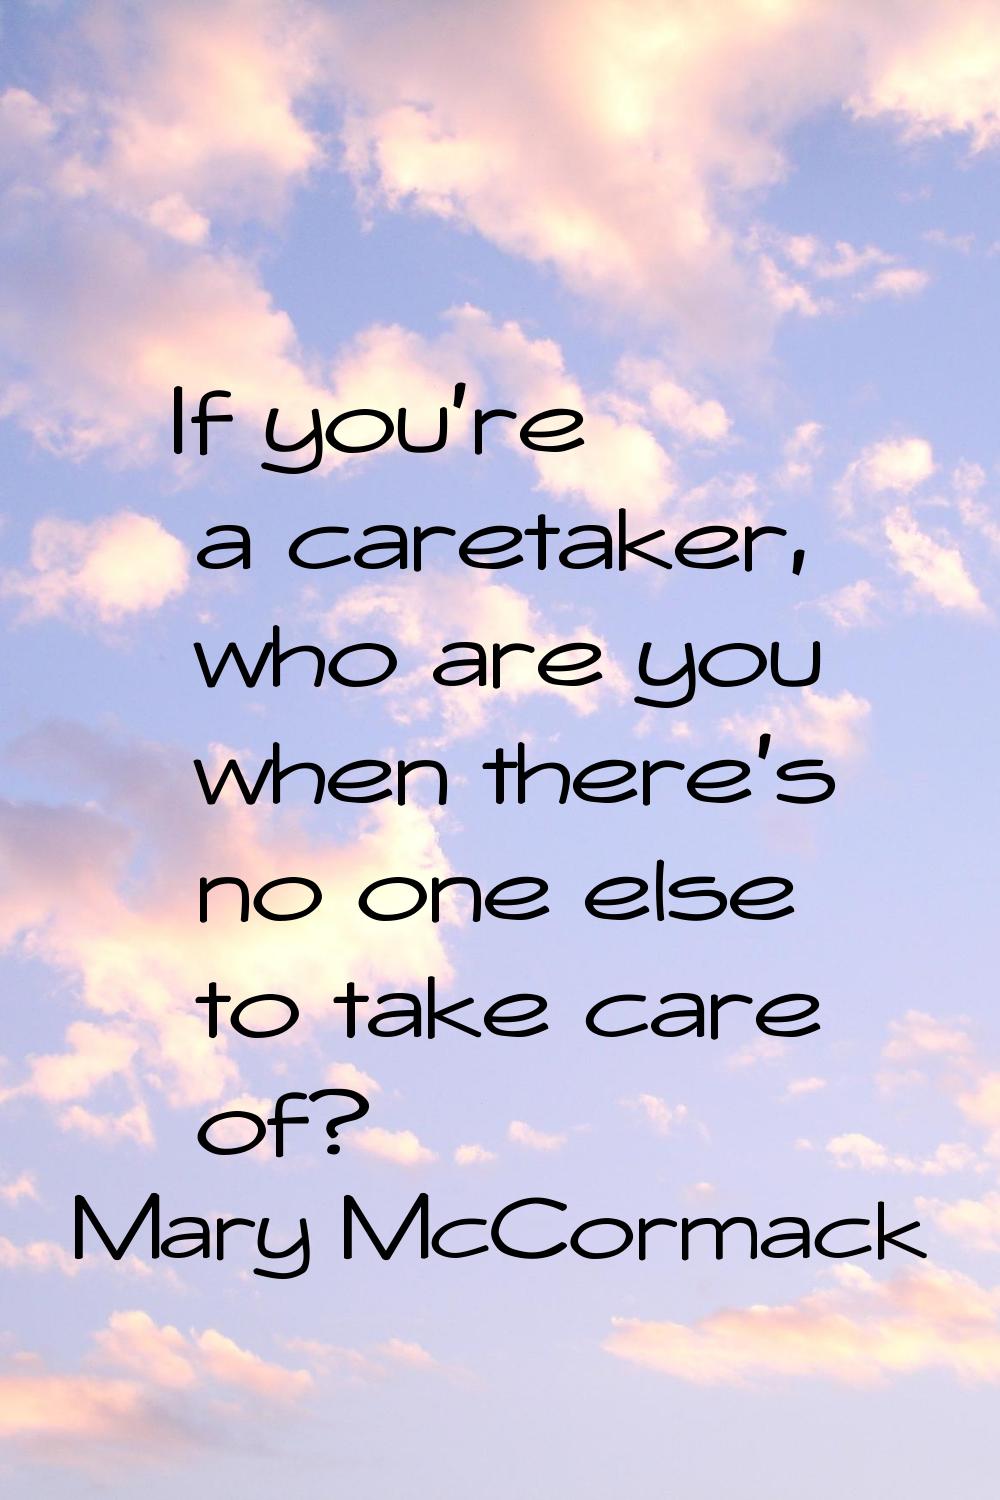 If you're a caretaker, who are you when there's no one else to take care of?